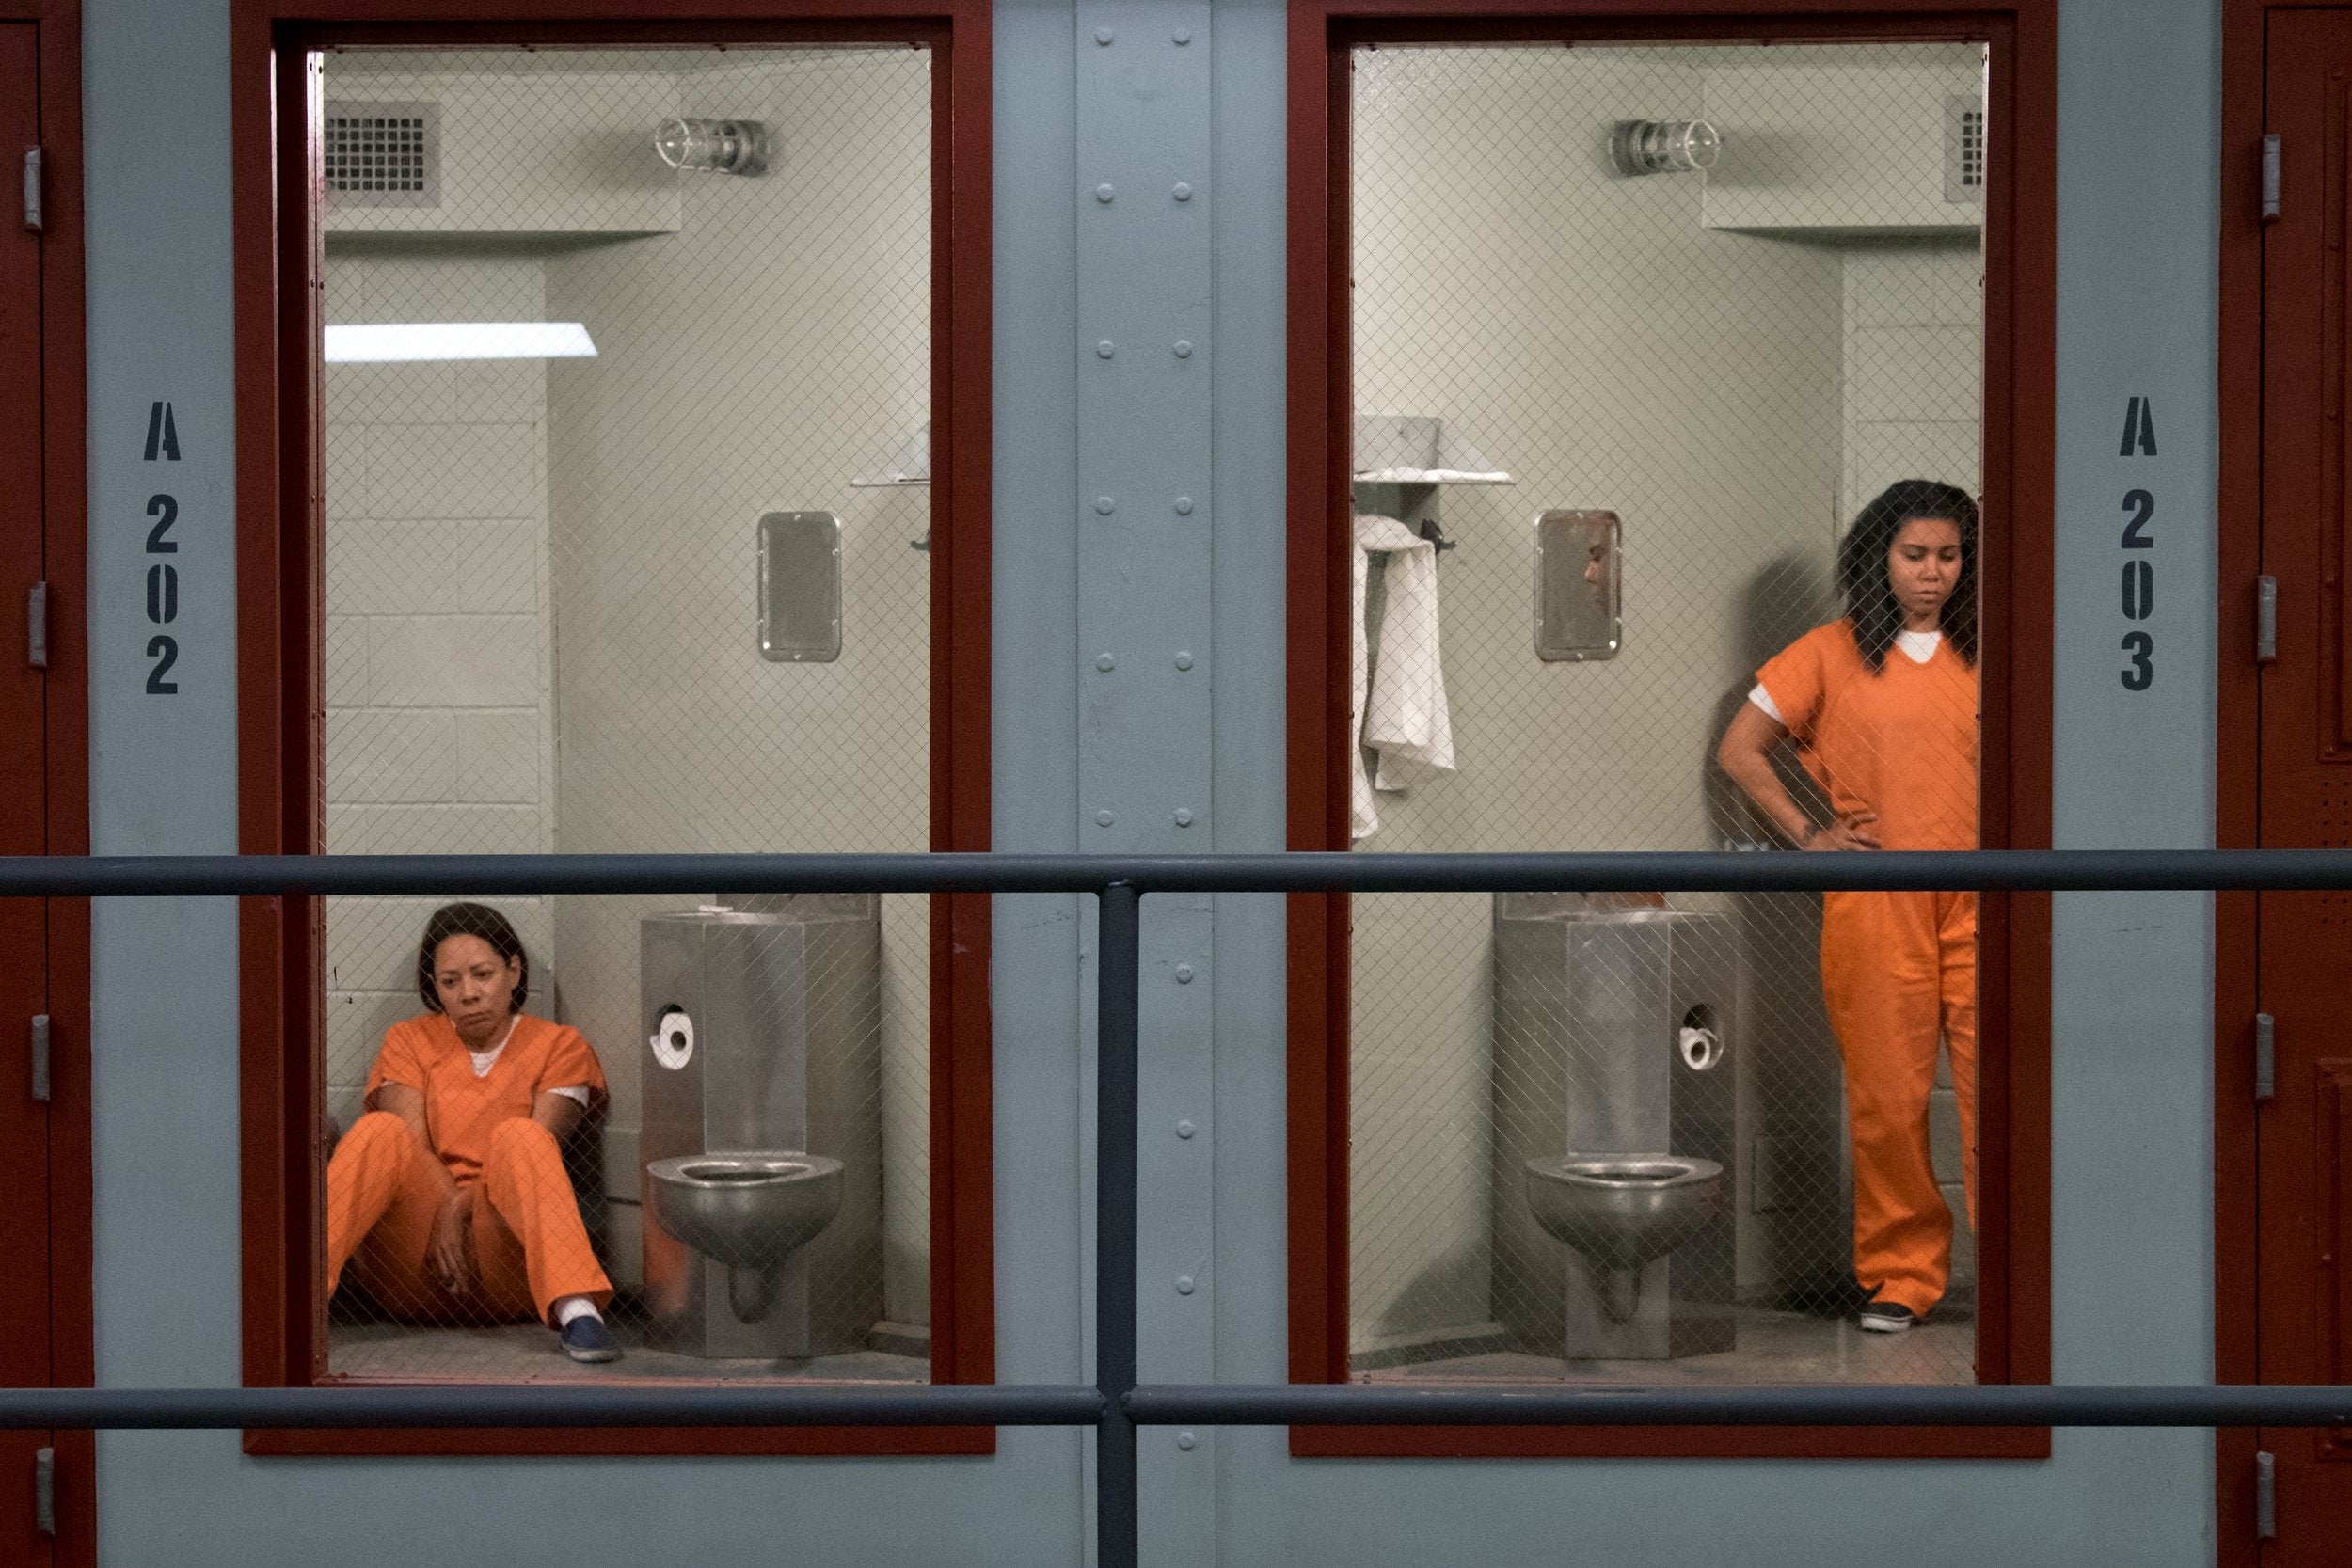 ‘Orange is the New Black’ returns for a sixth season – by all accounts, another stellar set of episodes